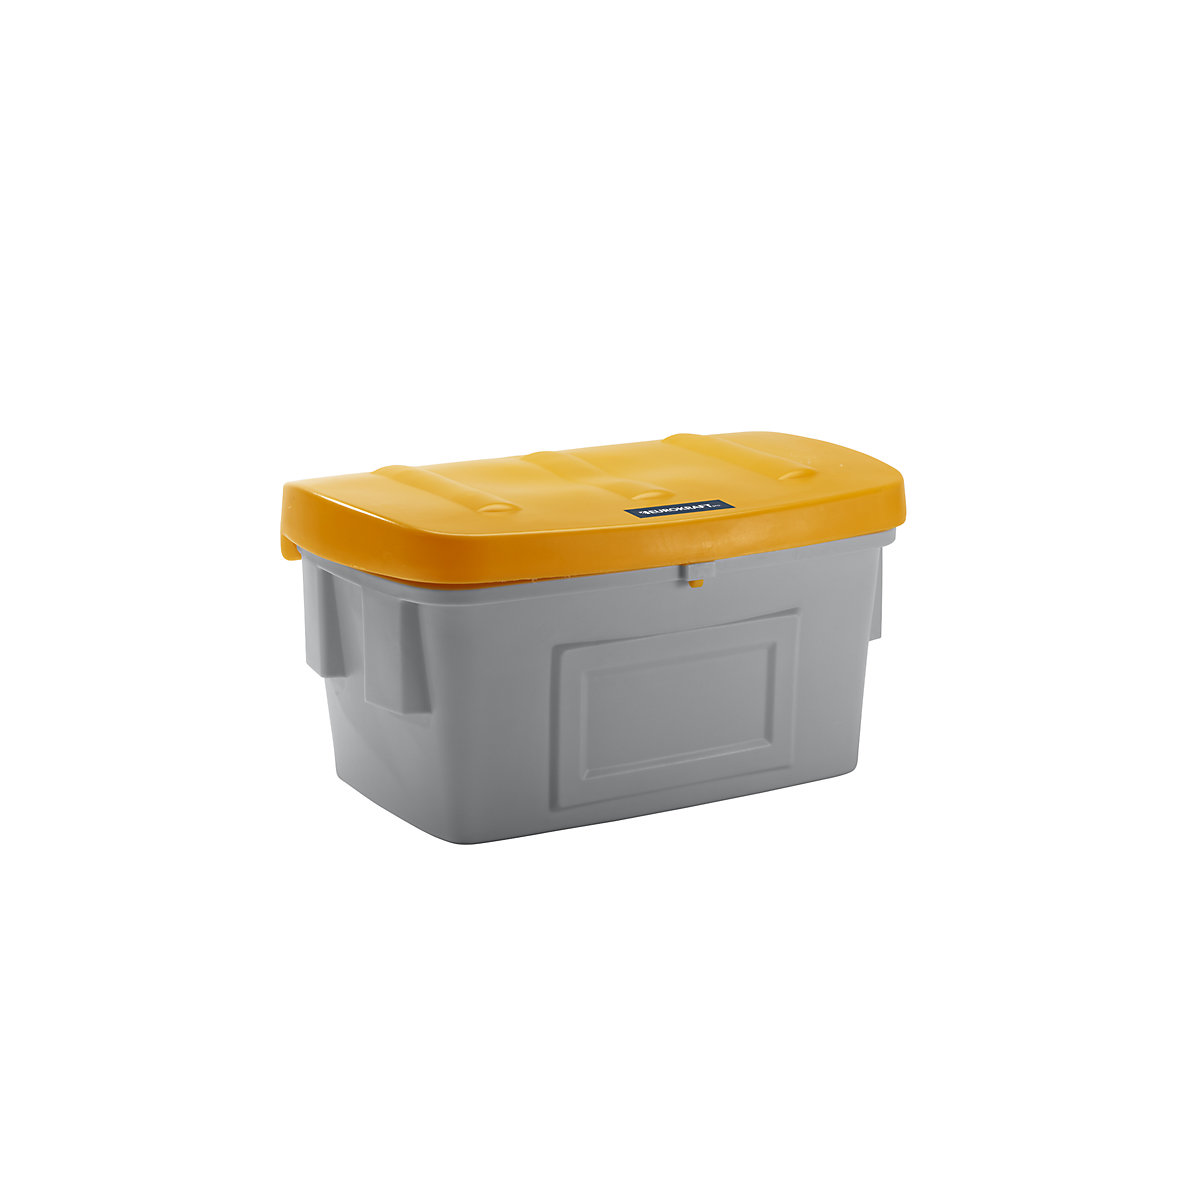 Universal / grit container – eurokraft pro, without dispenser opening, 400 l, orange lid-10